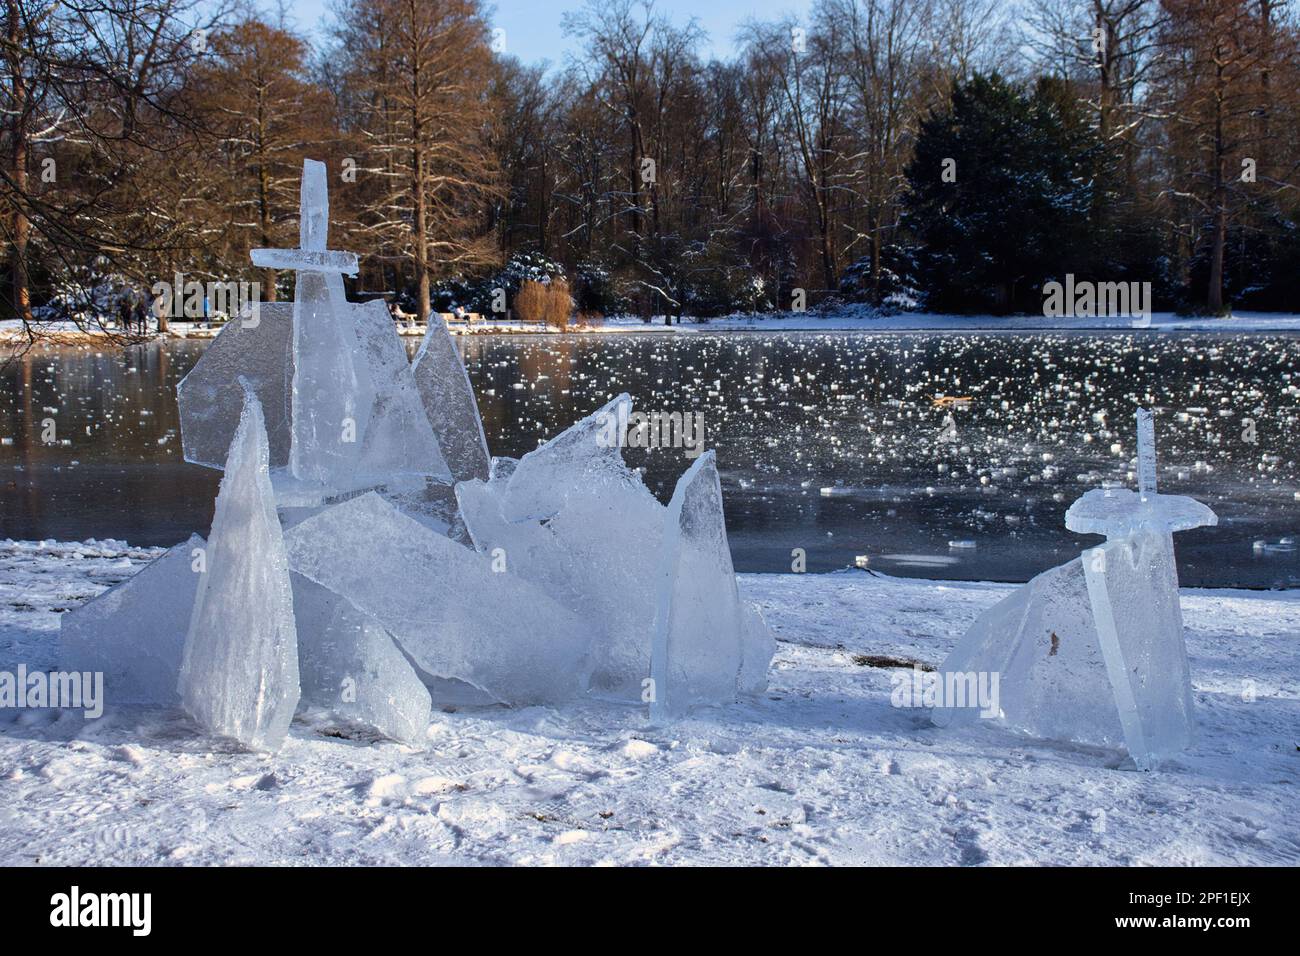 Karlsruhe, Germany - February 12, 2021: Chunks of ice piled up next to a small pond at the Karlsruhe Palace gardens on a winter day in Germany. Stock Photo